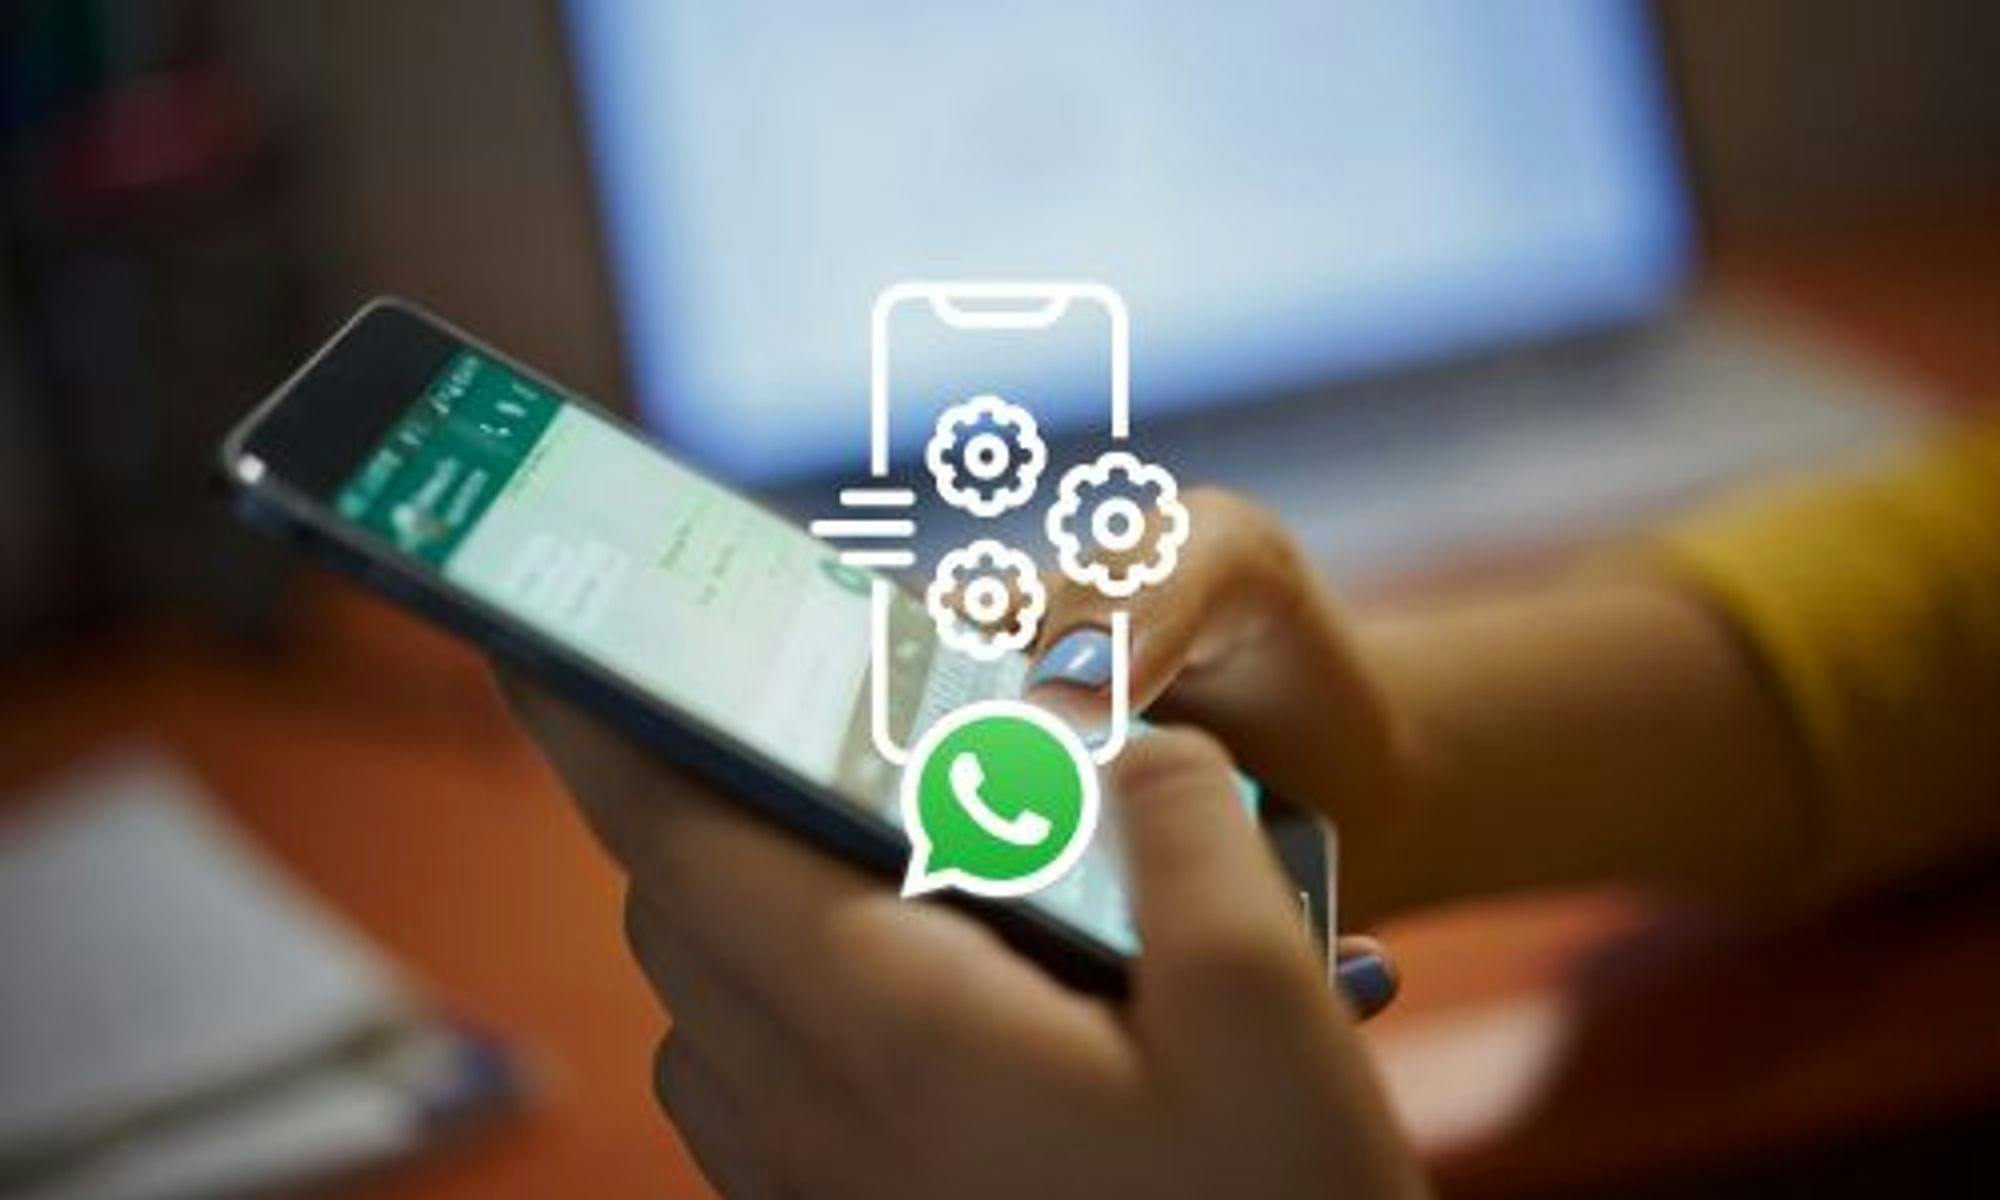 WhatsApp Business account features